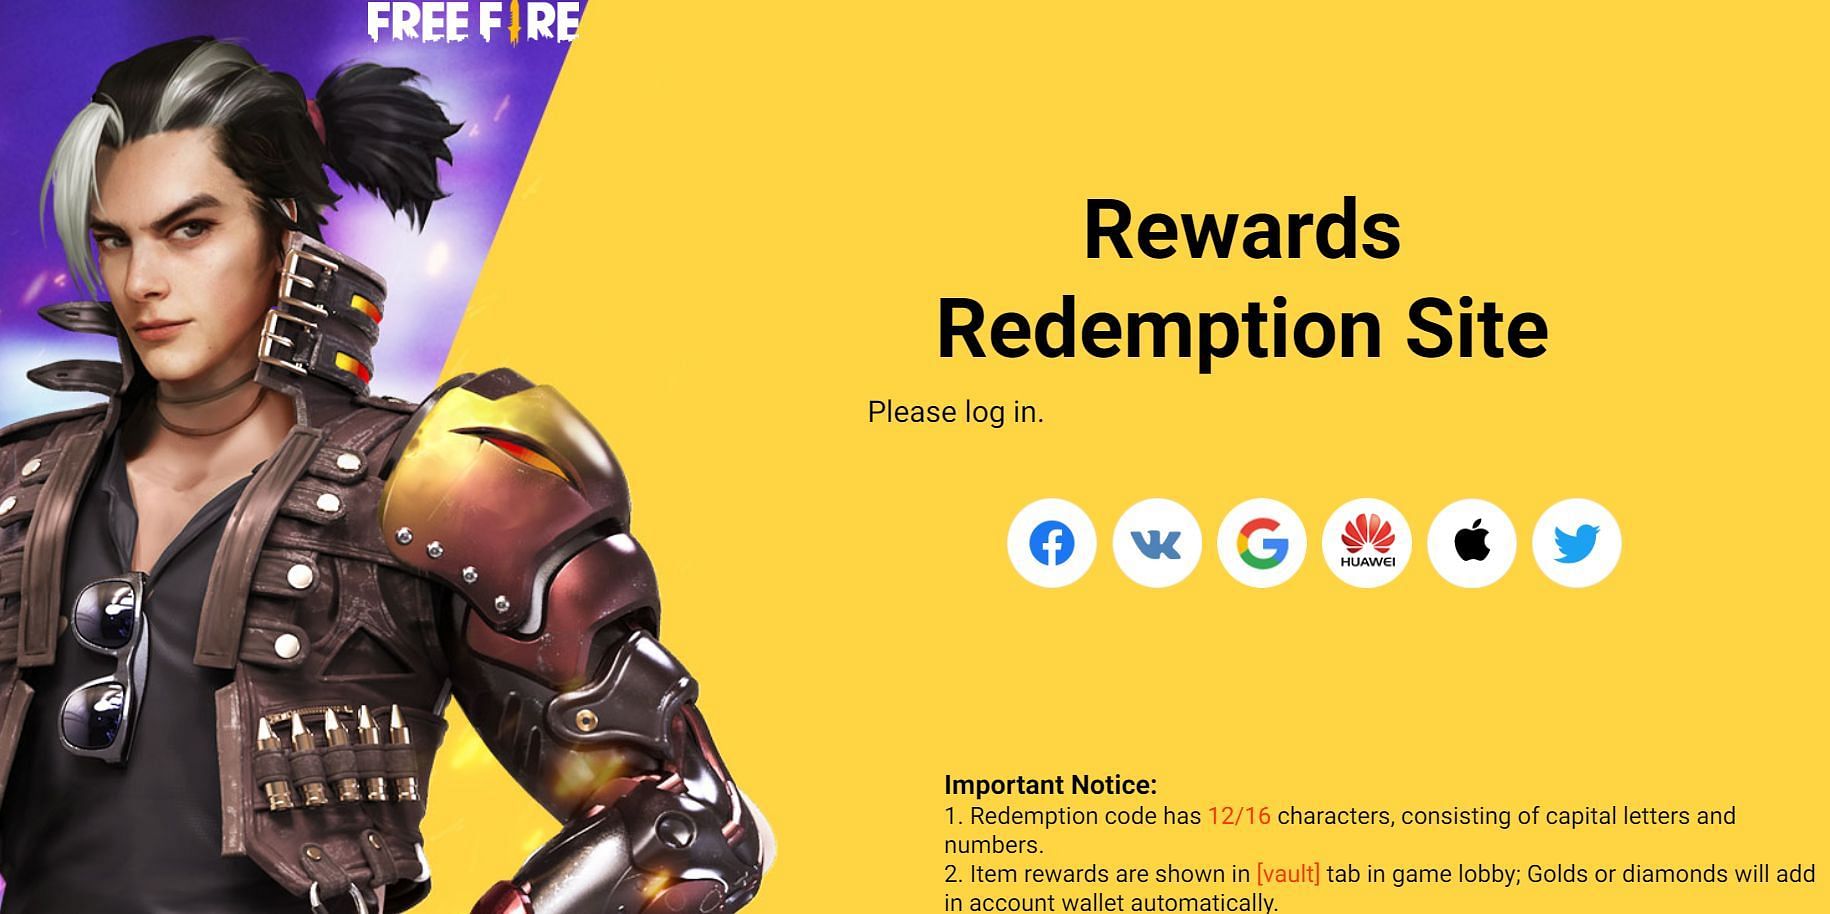 This is the game&#039;s official redemption site (Image via Garena)